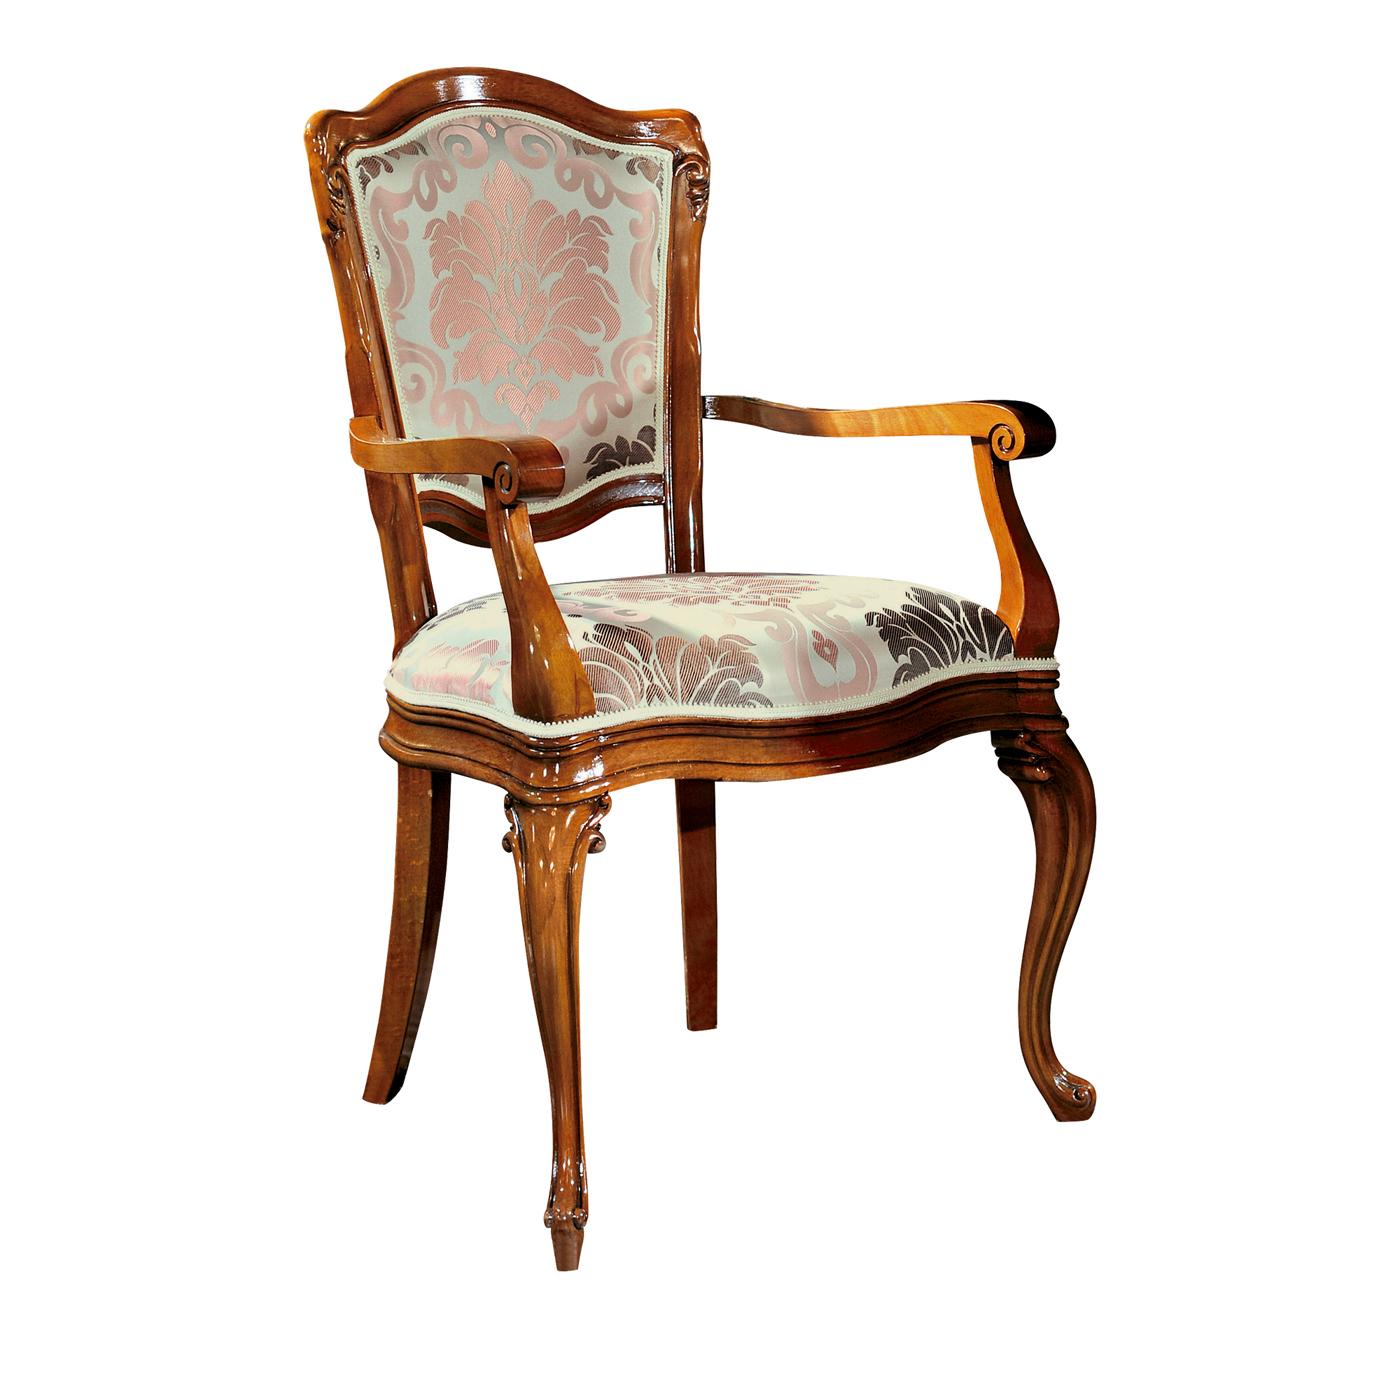 The elegance of Italian Baroque style: this wooden dining chair with armrests is the ideal decor accessory for providing a touch of elegance to the dining room. The front legs are Queen Anne style, while the back legs are Saber style. The seat and